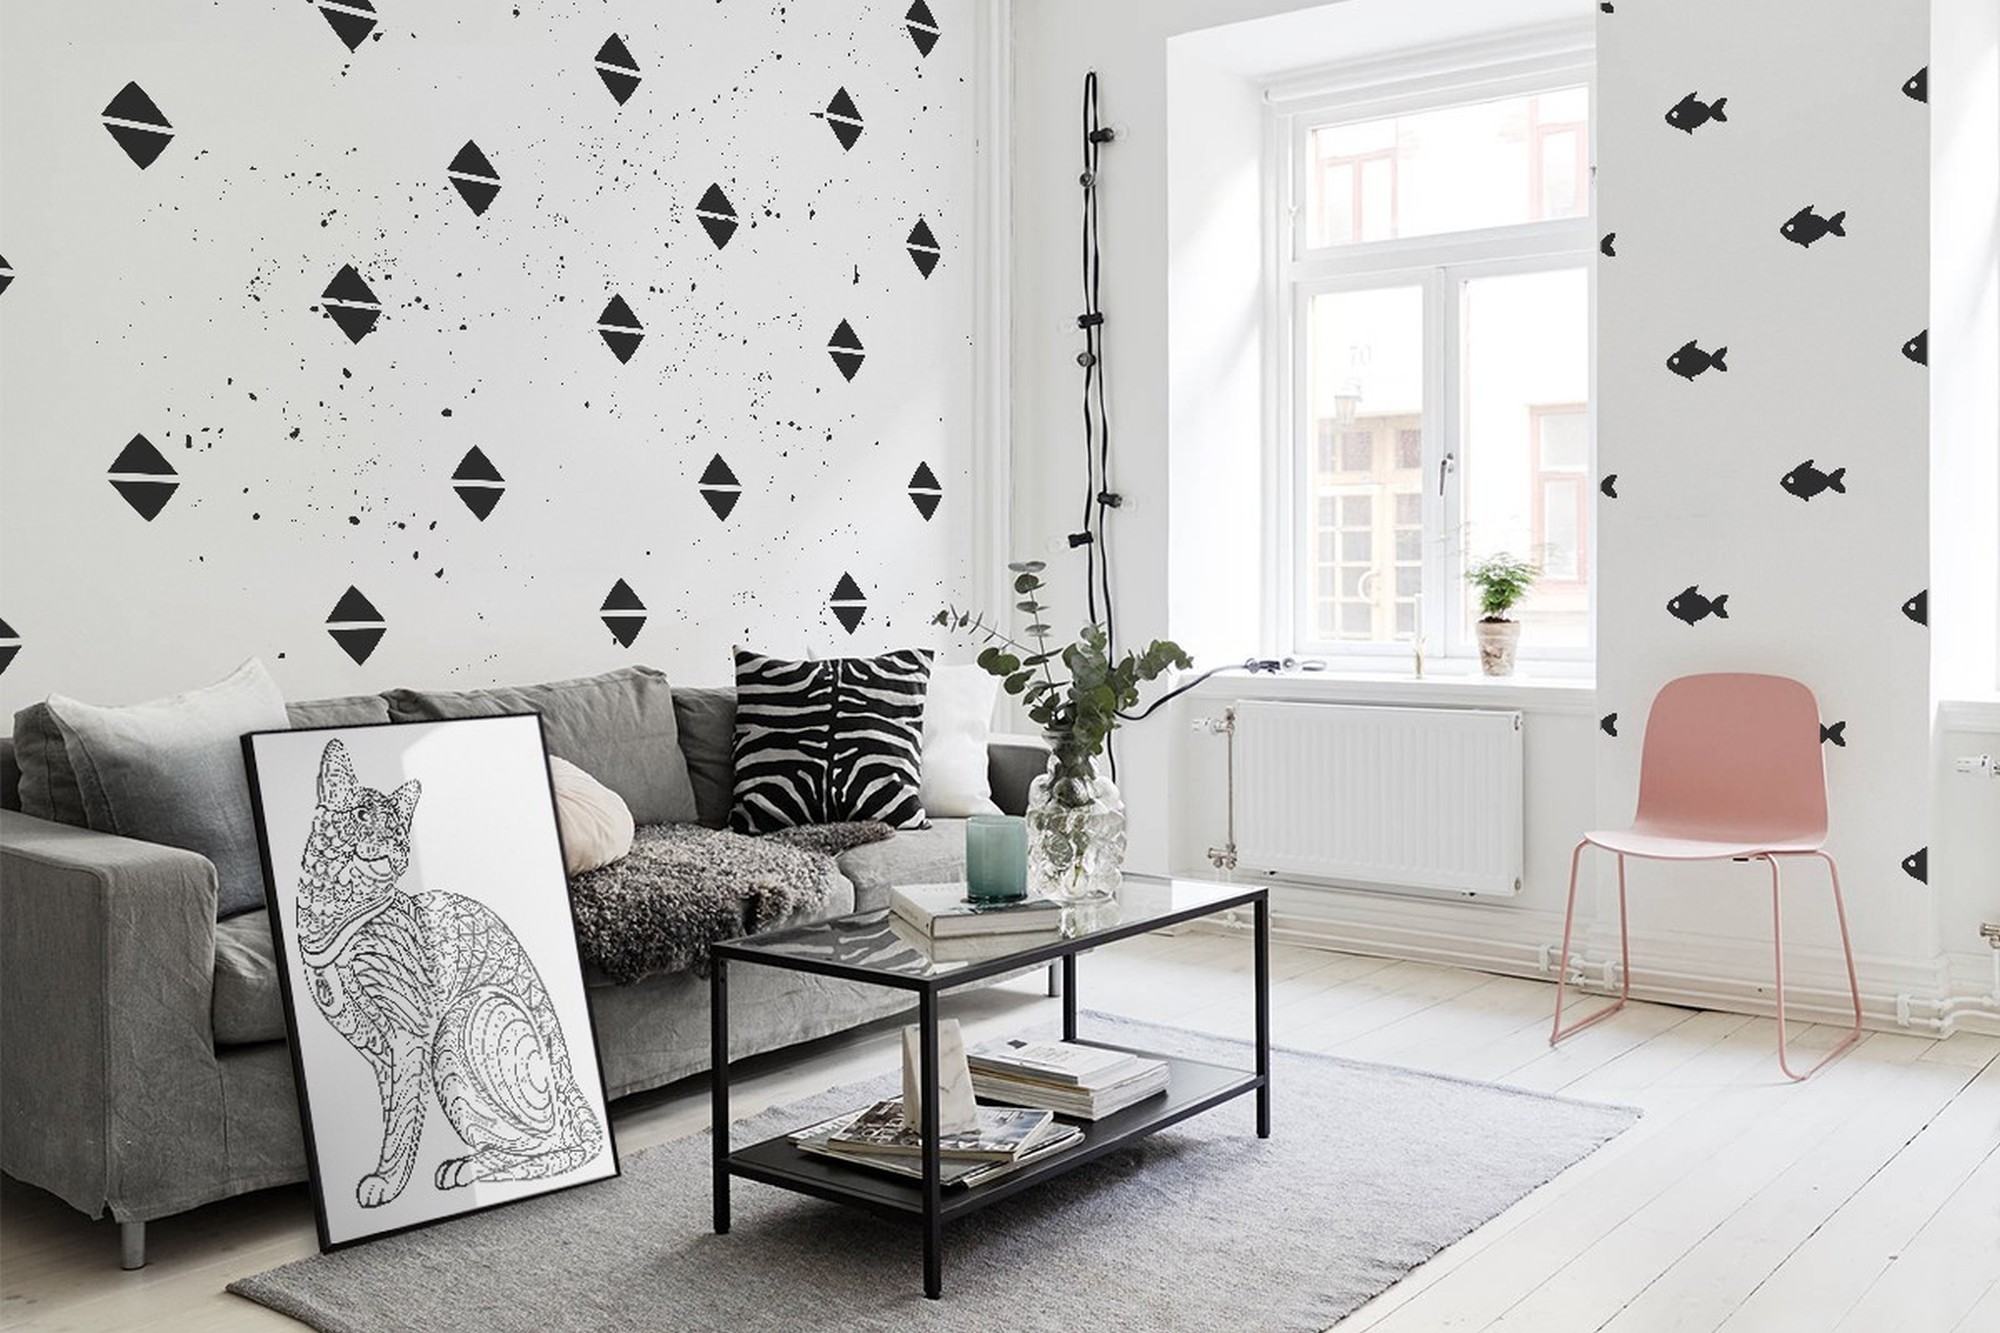 Cat's Apetite • Scandinavian - Living room - Textures and patterns - Animals - Wall Murals - Posters